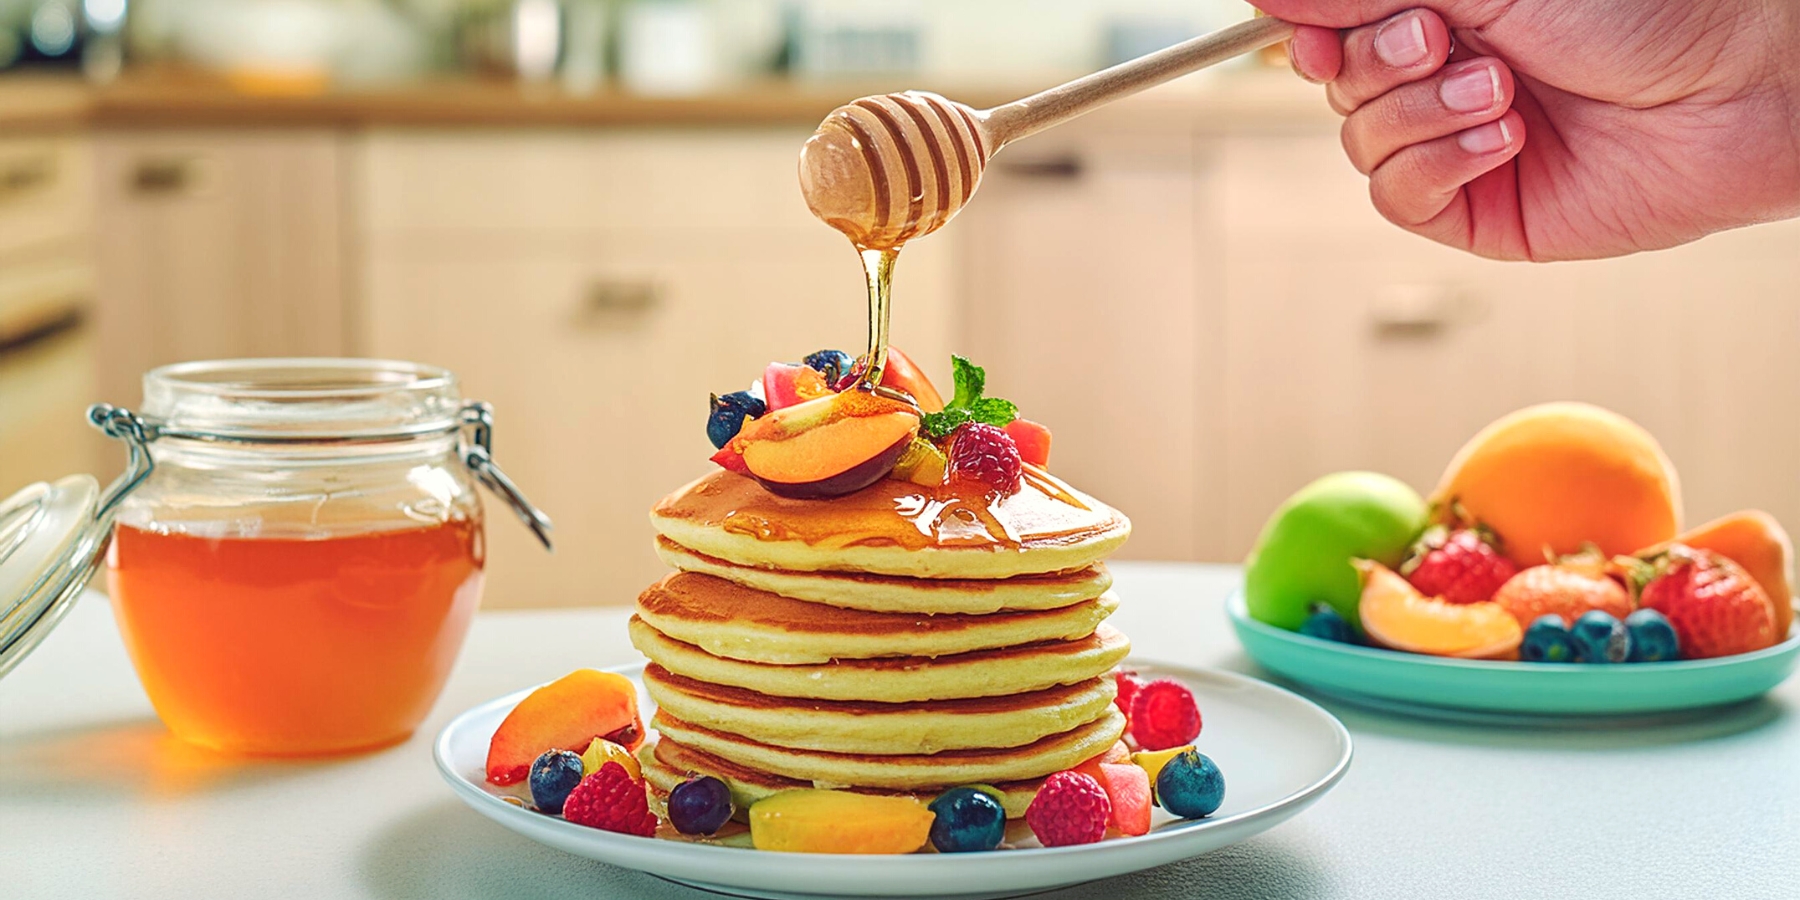 A hand holding a honey spoon and drizzling honey over a stack of pancakes and fruit